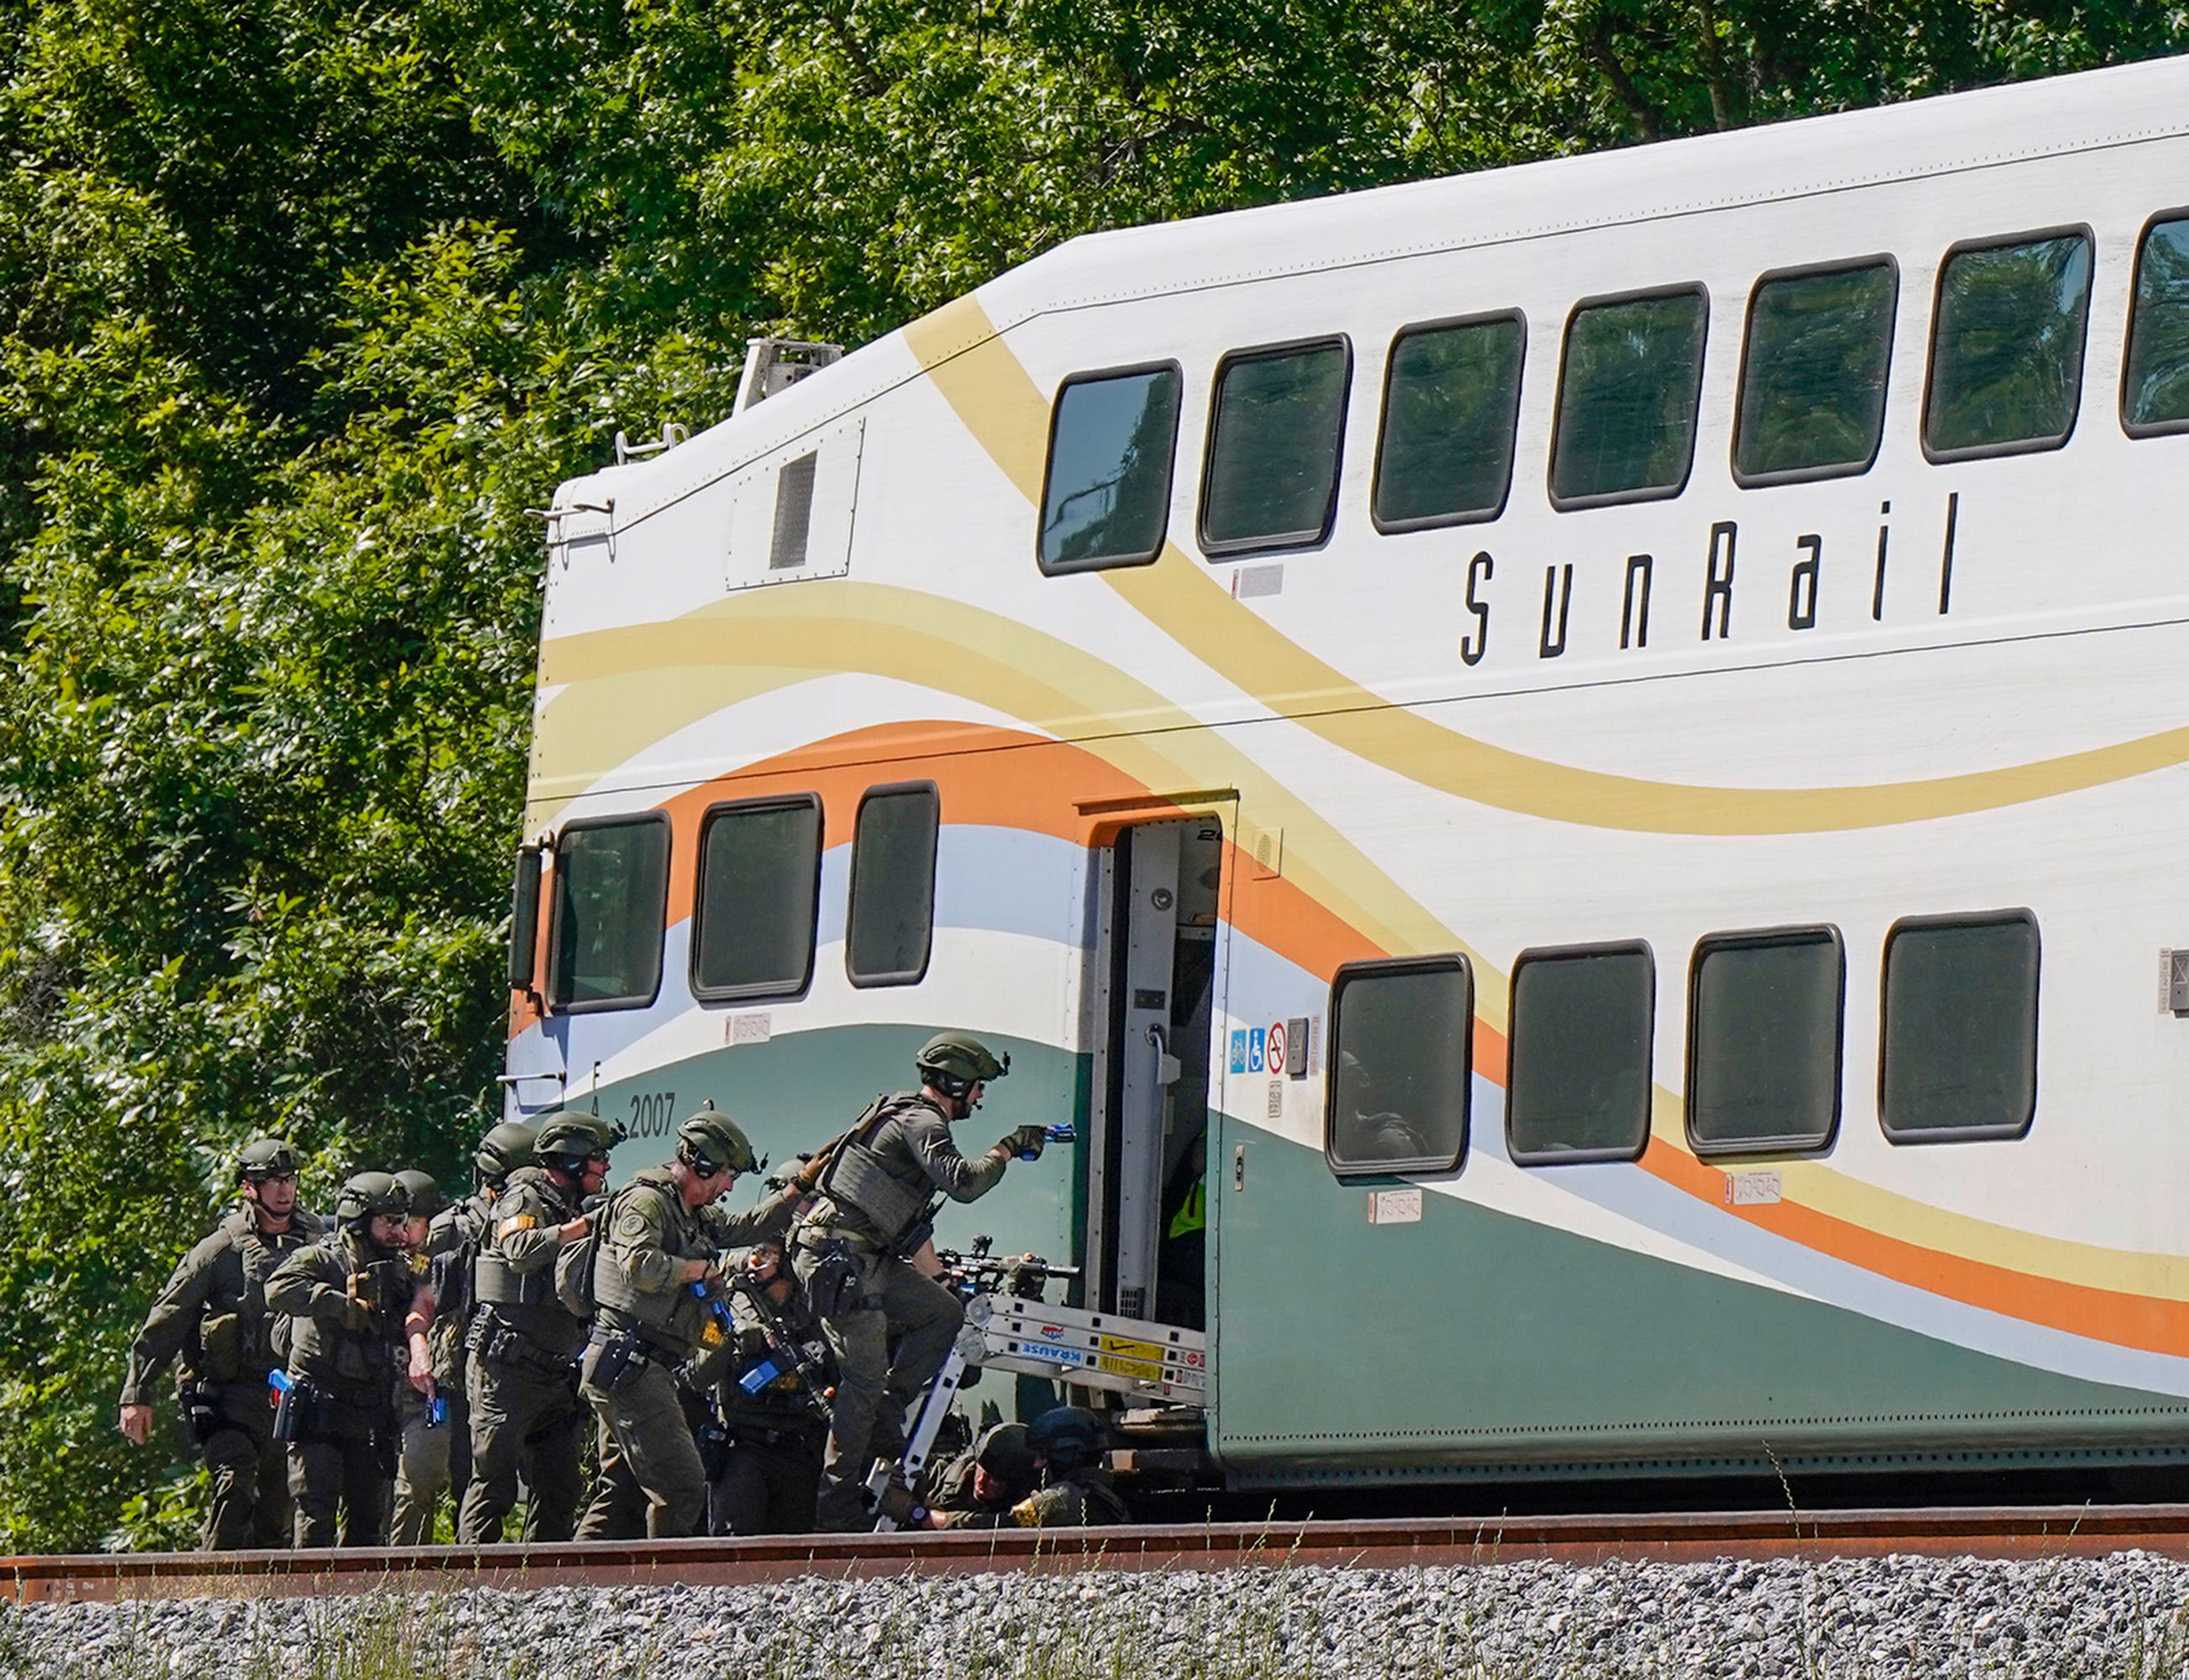 First responders participate in drill where man threatens to blow up SunRail train